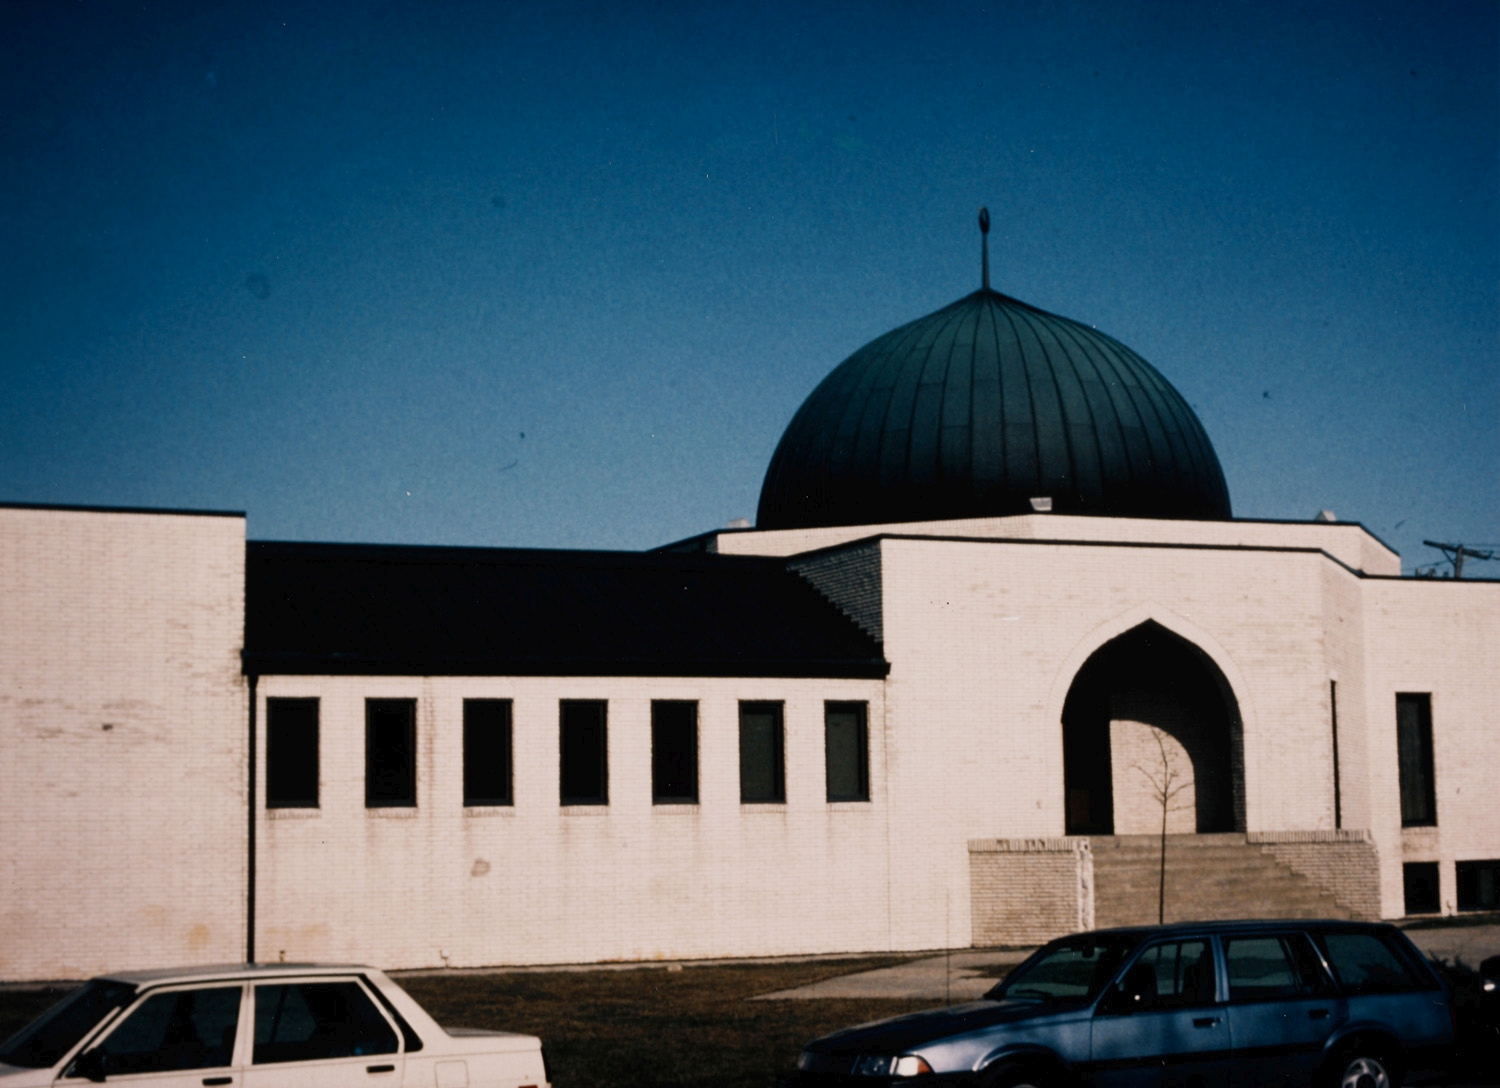 View along south facade with arched entrance; mosque prior to expansion